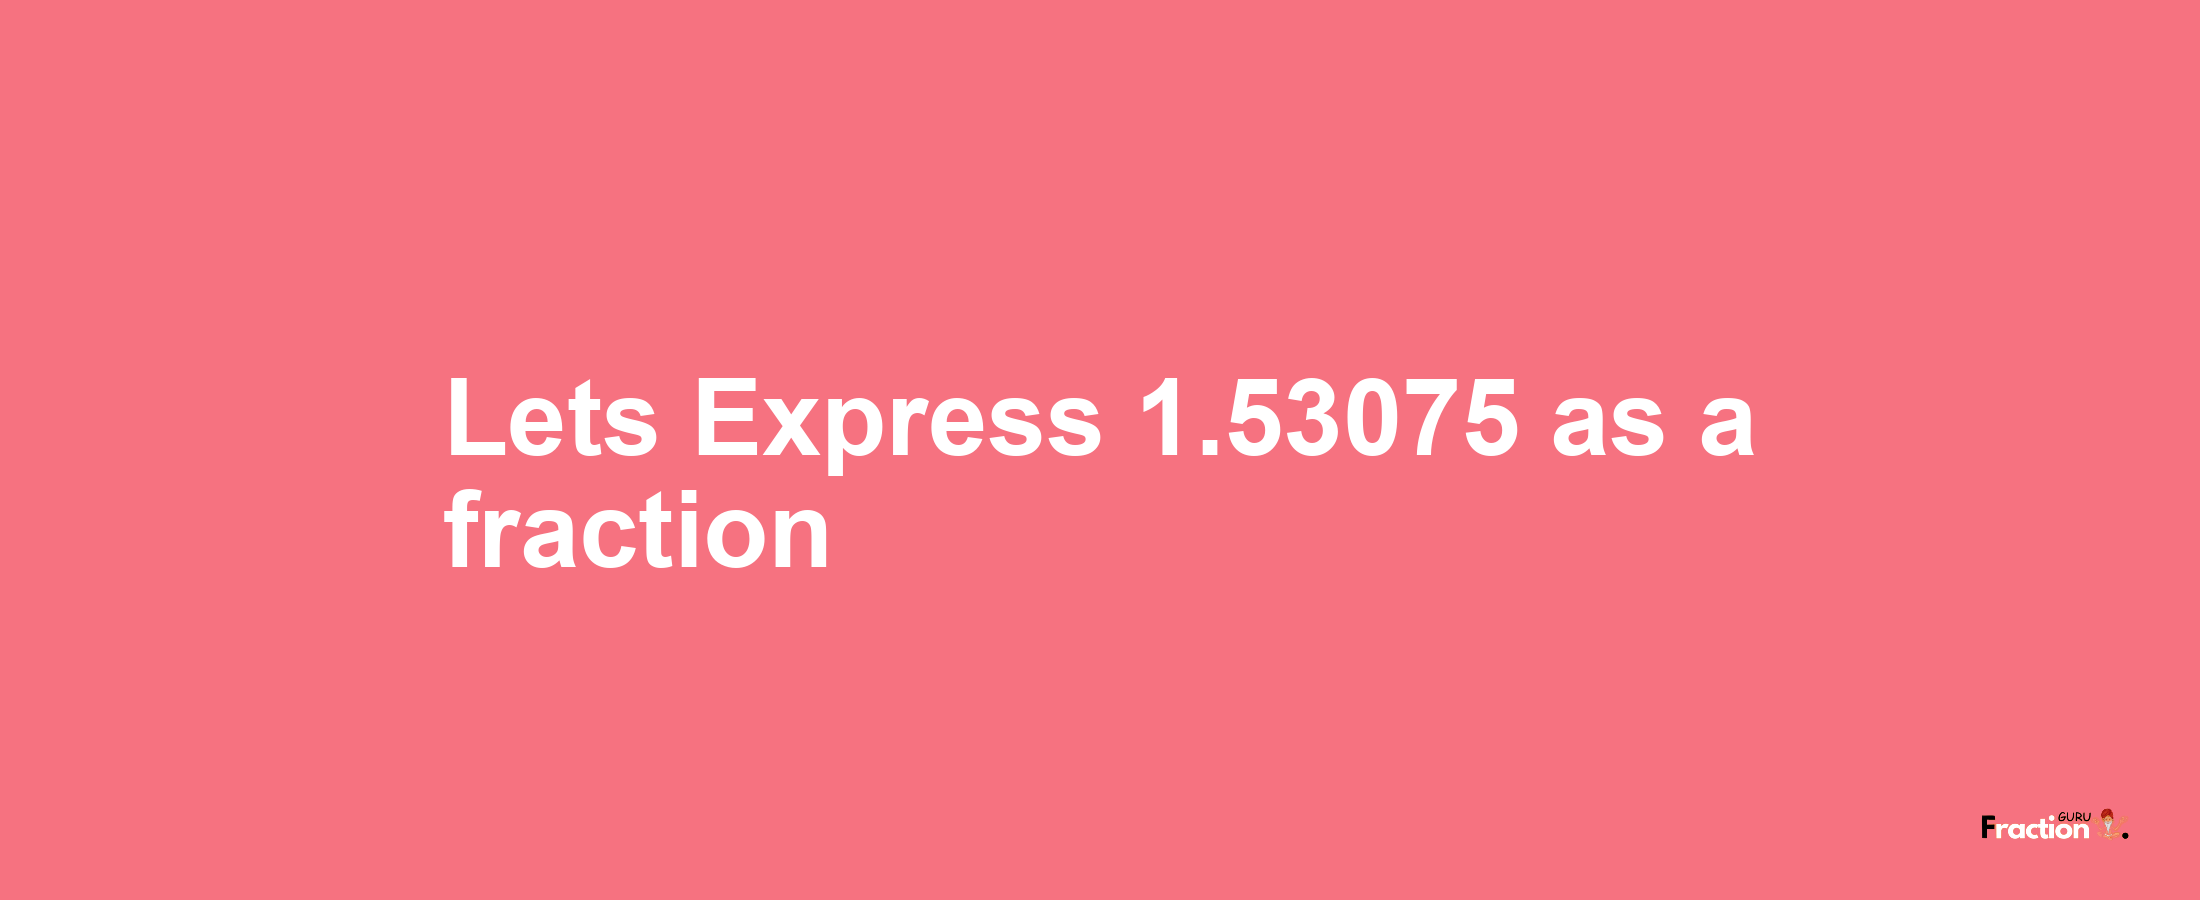 Lets Express 1.53075 as afraction